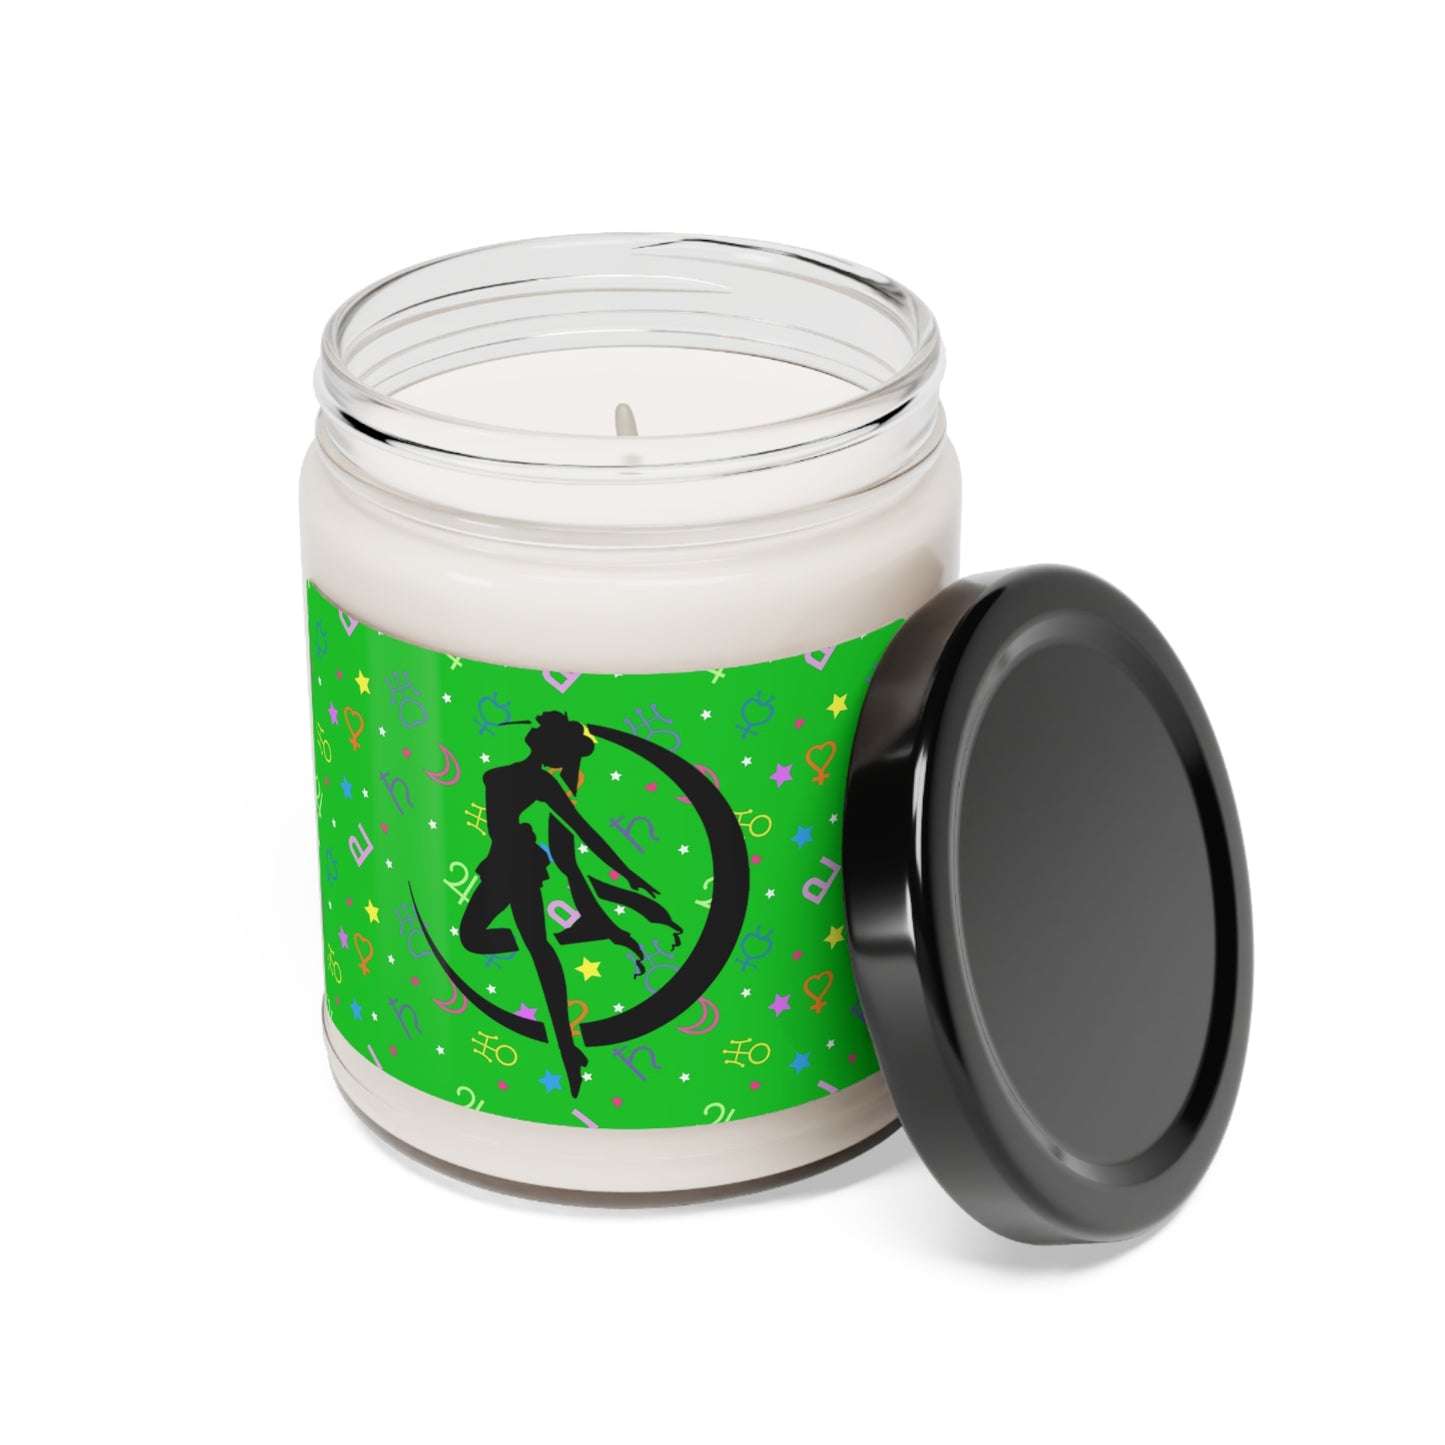 Sailor Symbols Planets Magical Girls Scented Soy Candle, Green, anime, kawaii, cosplay, scouts, natural soy wax 9oz